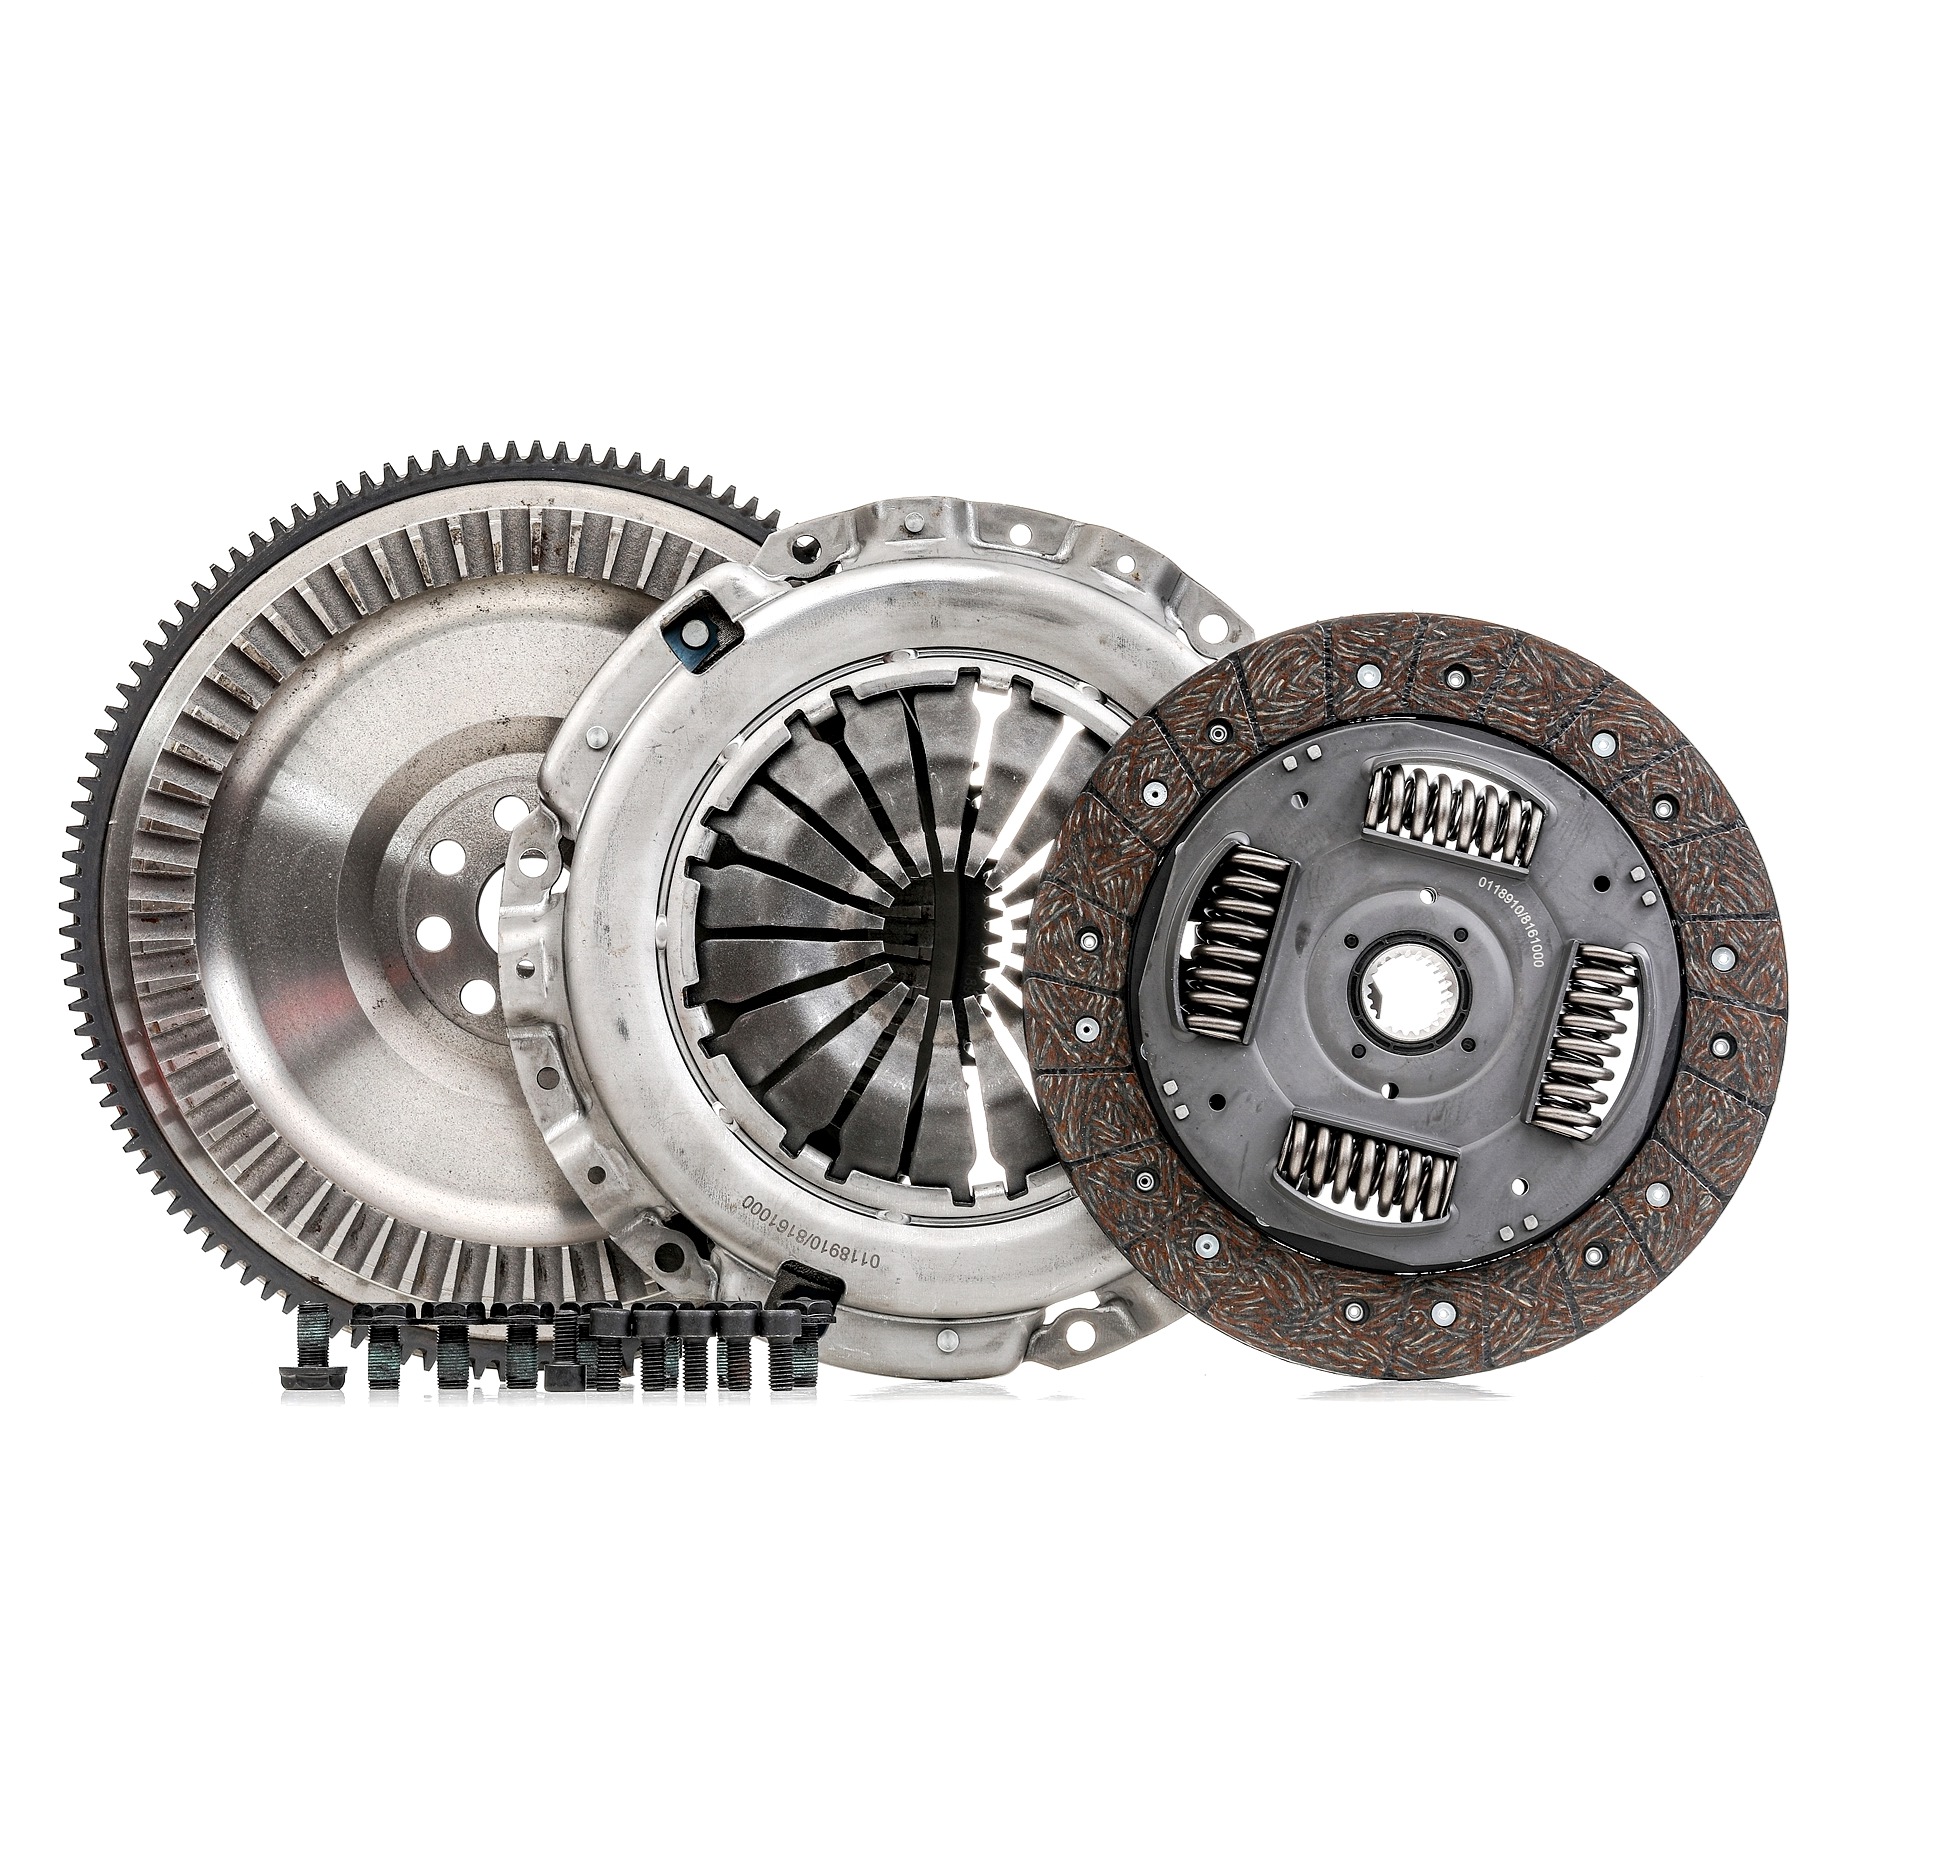 Original SKCK-0100160 STARK Clutch kit experience and price